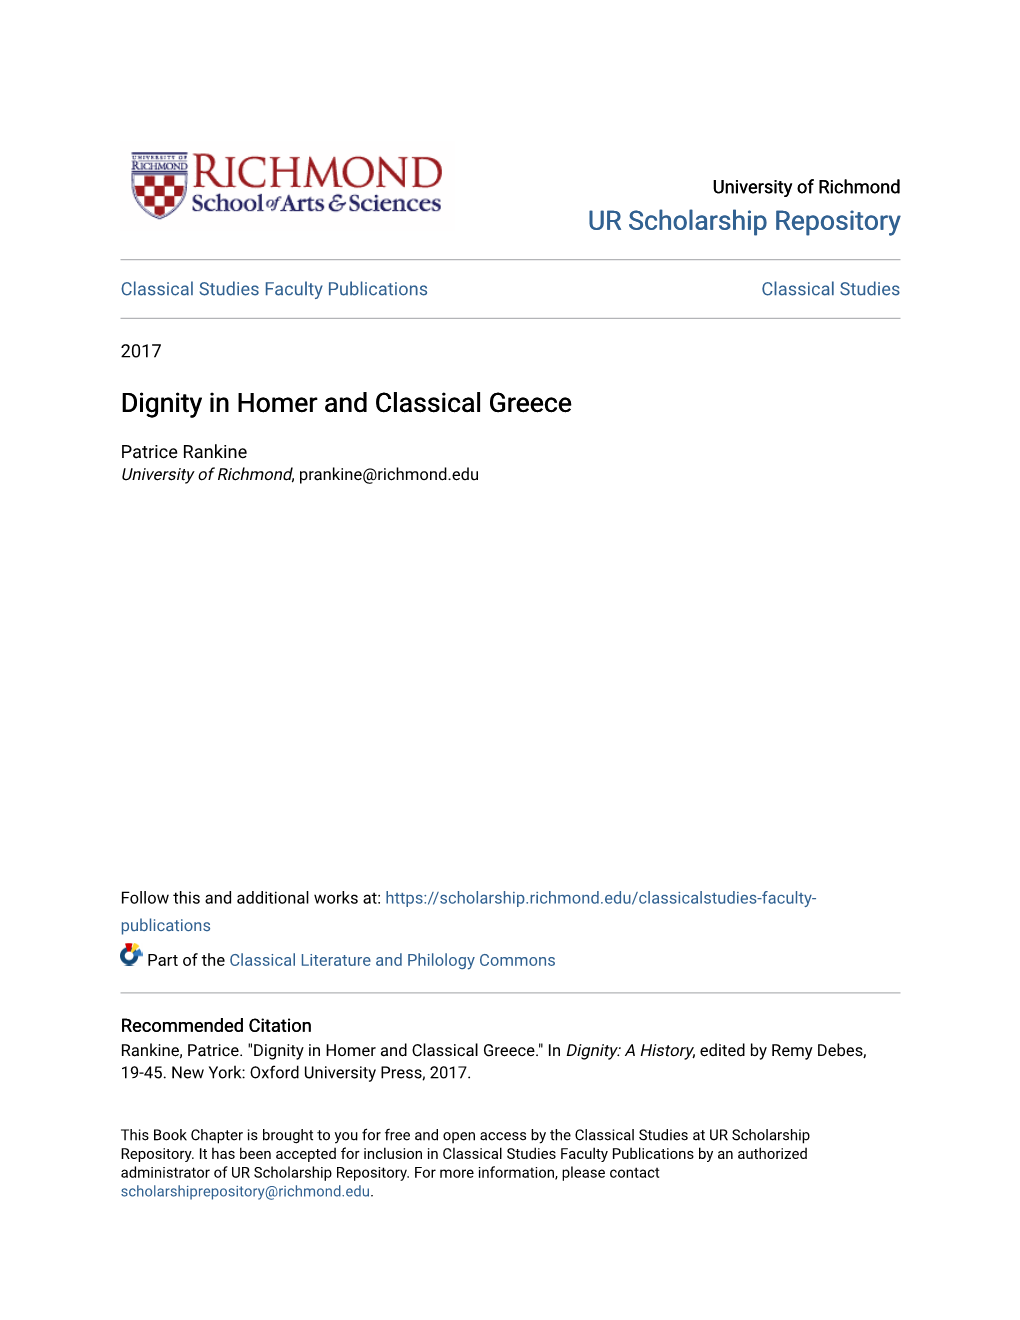 Dignity in Homer and Classical Greece